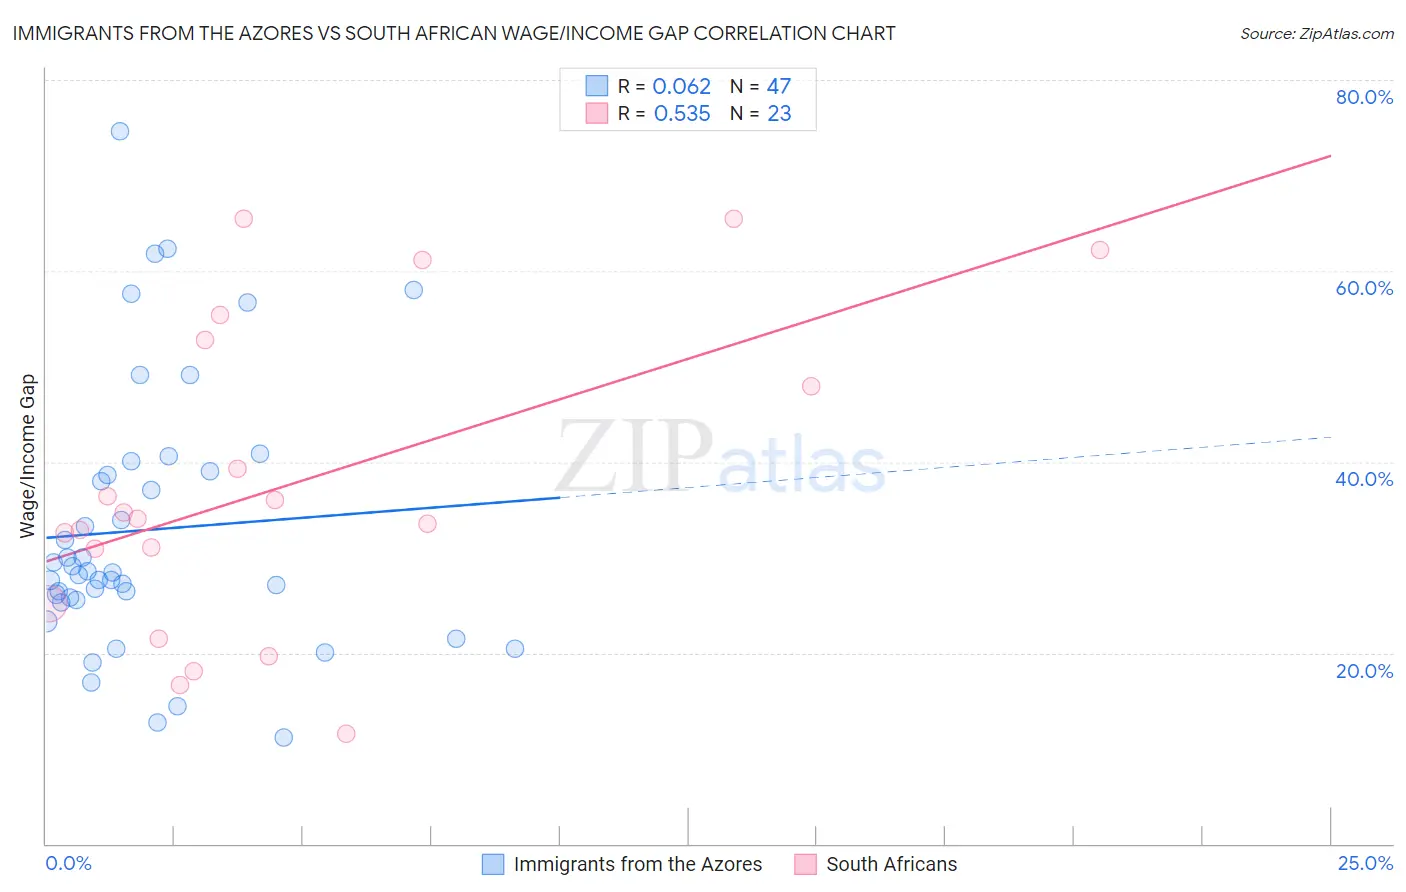 Immigrants from the Azores vs South African Wage/Income Gap